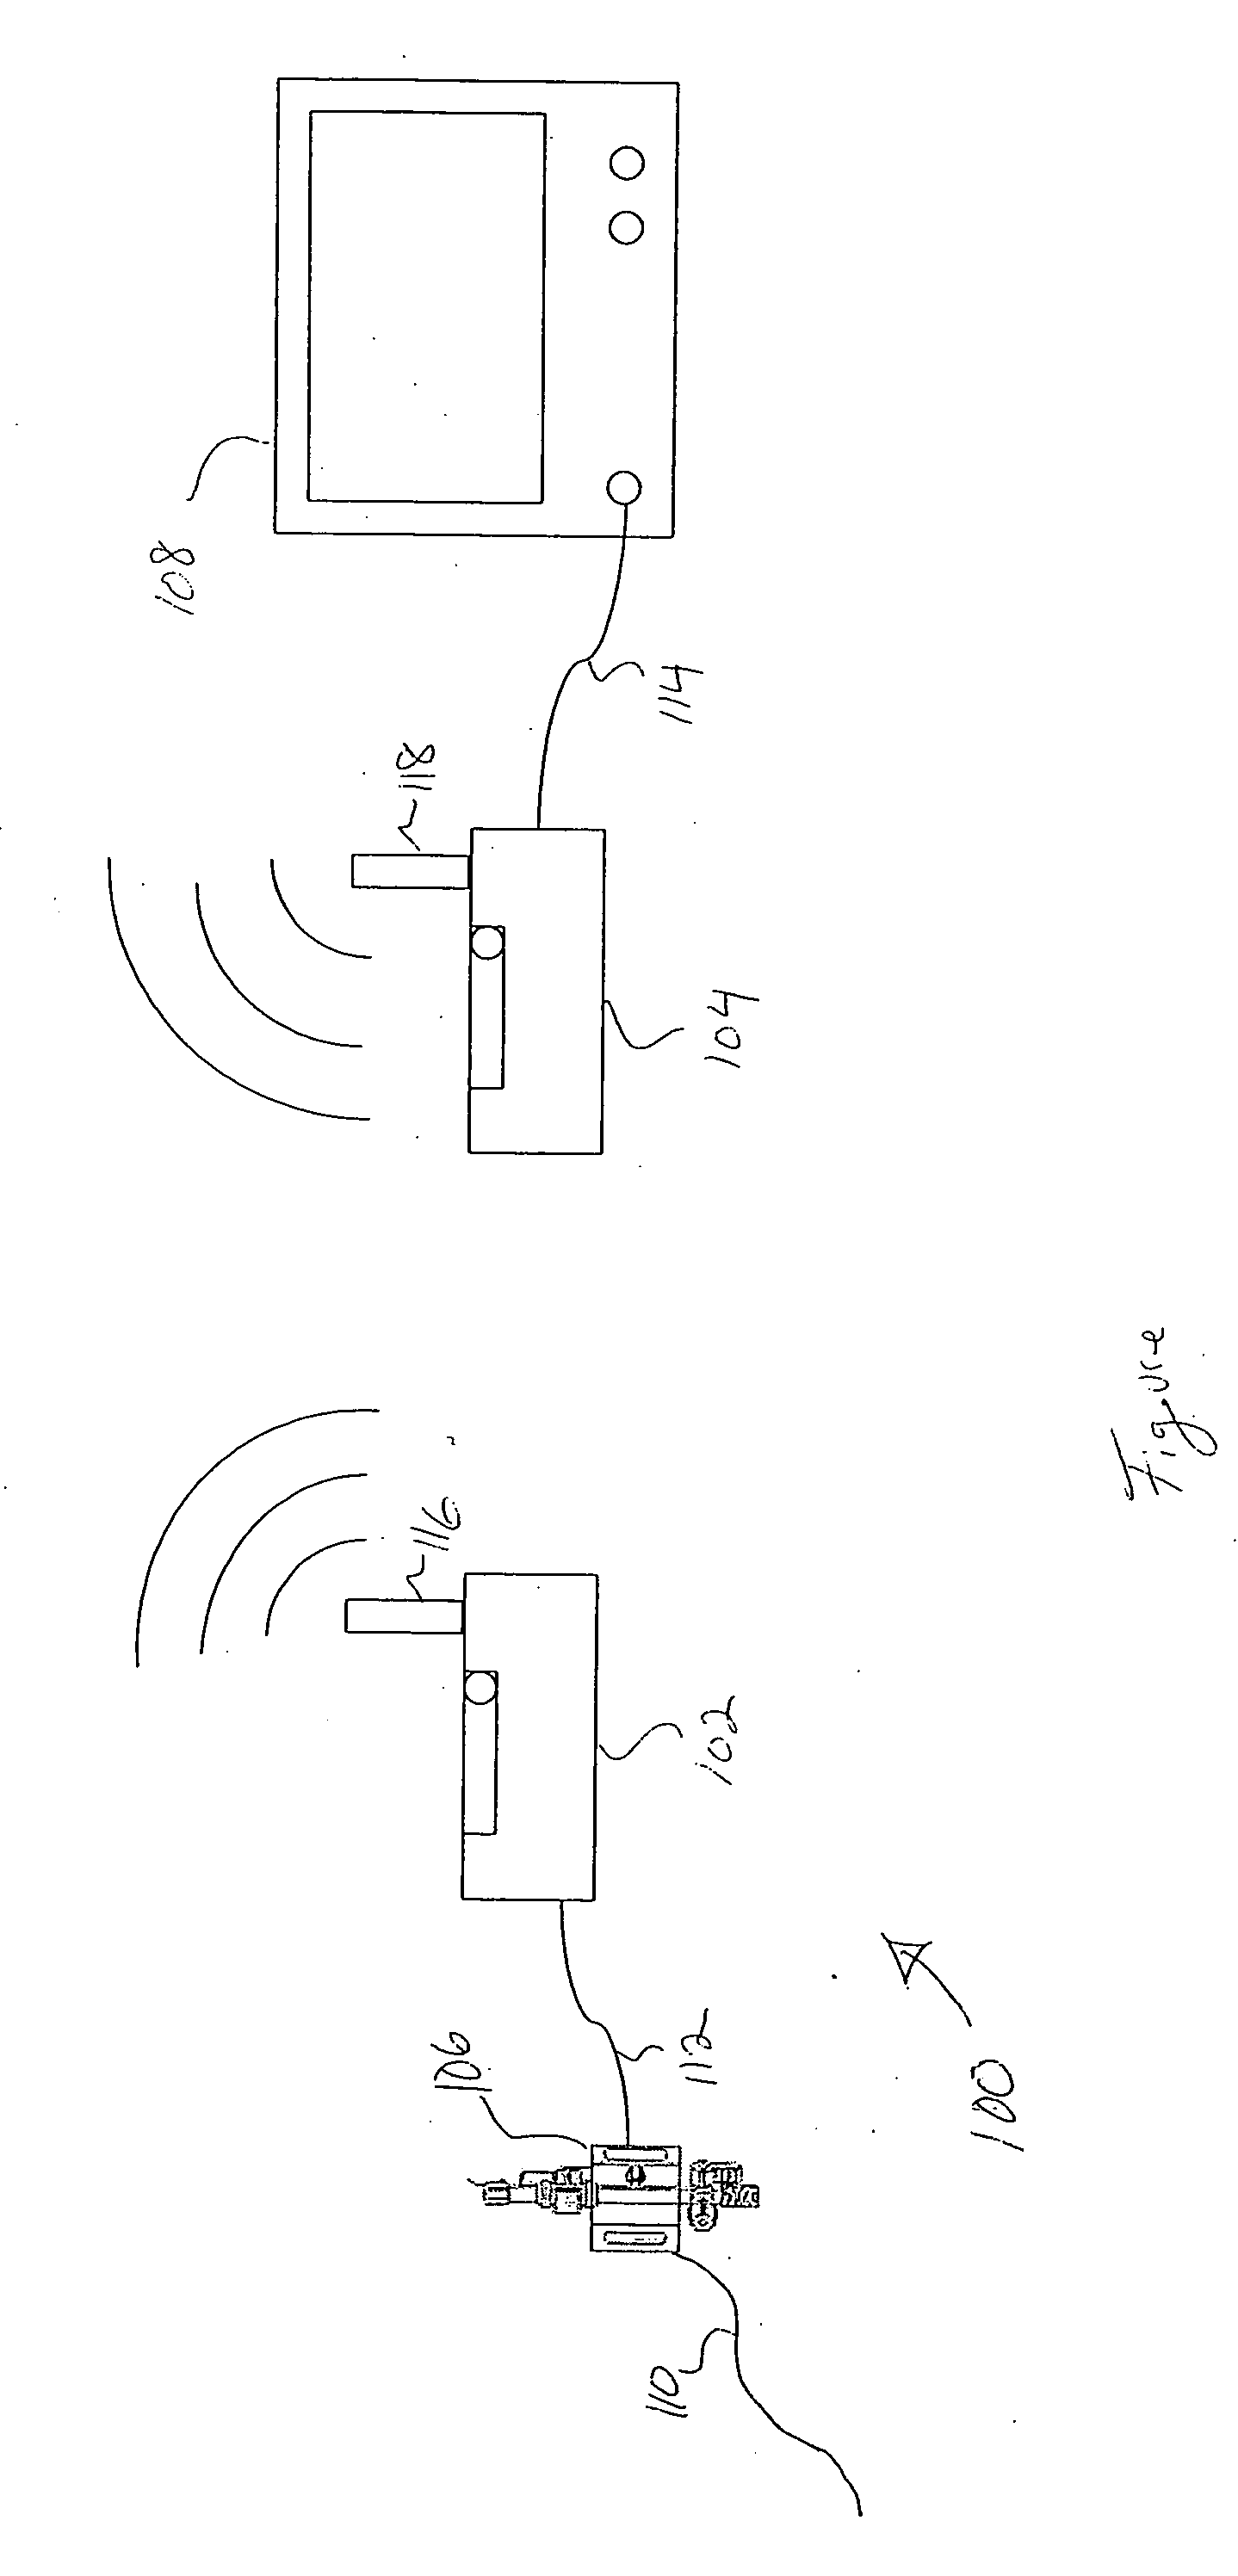 Wireless communication system for pressure monitoring